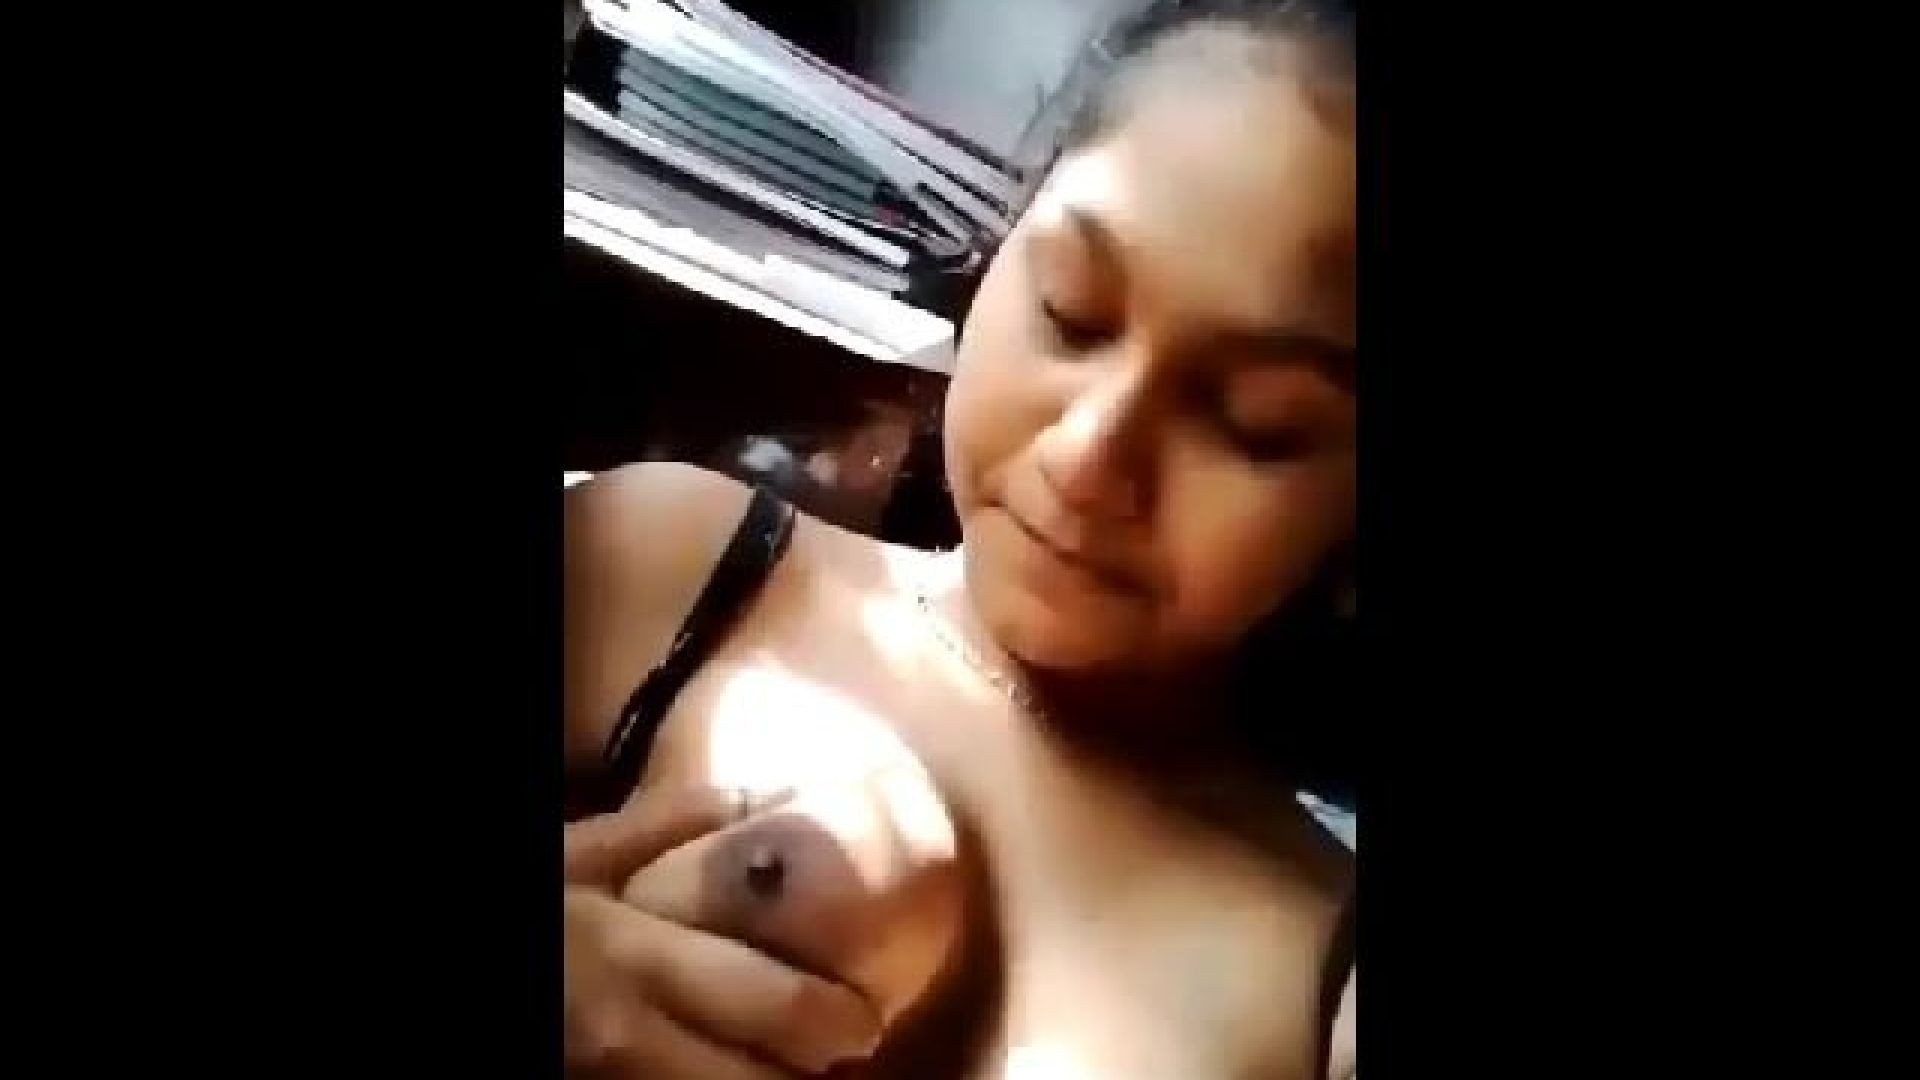 Hot girl playing with sexy boobs